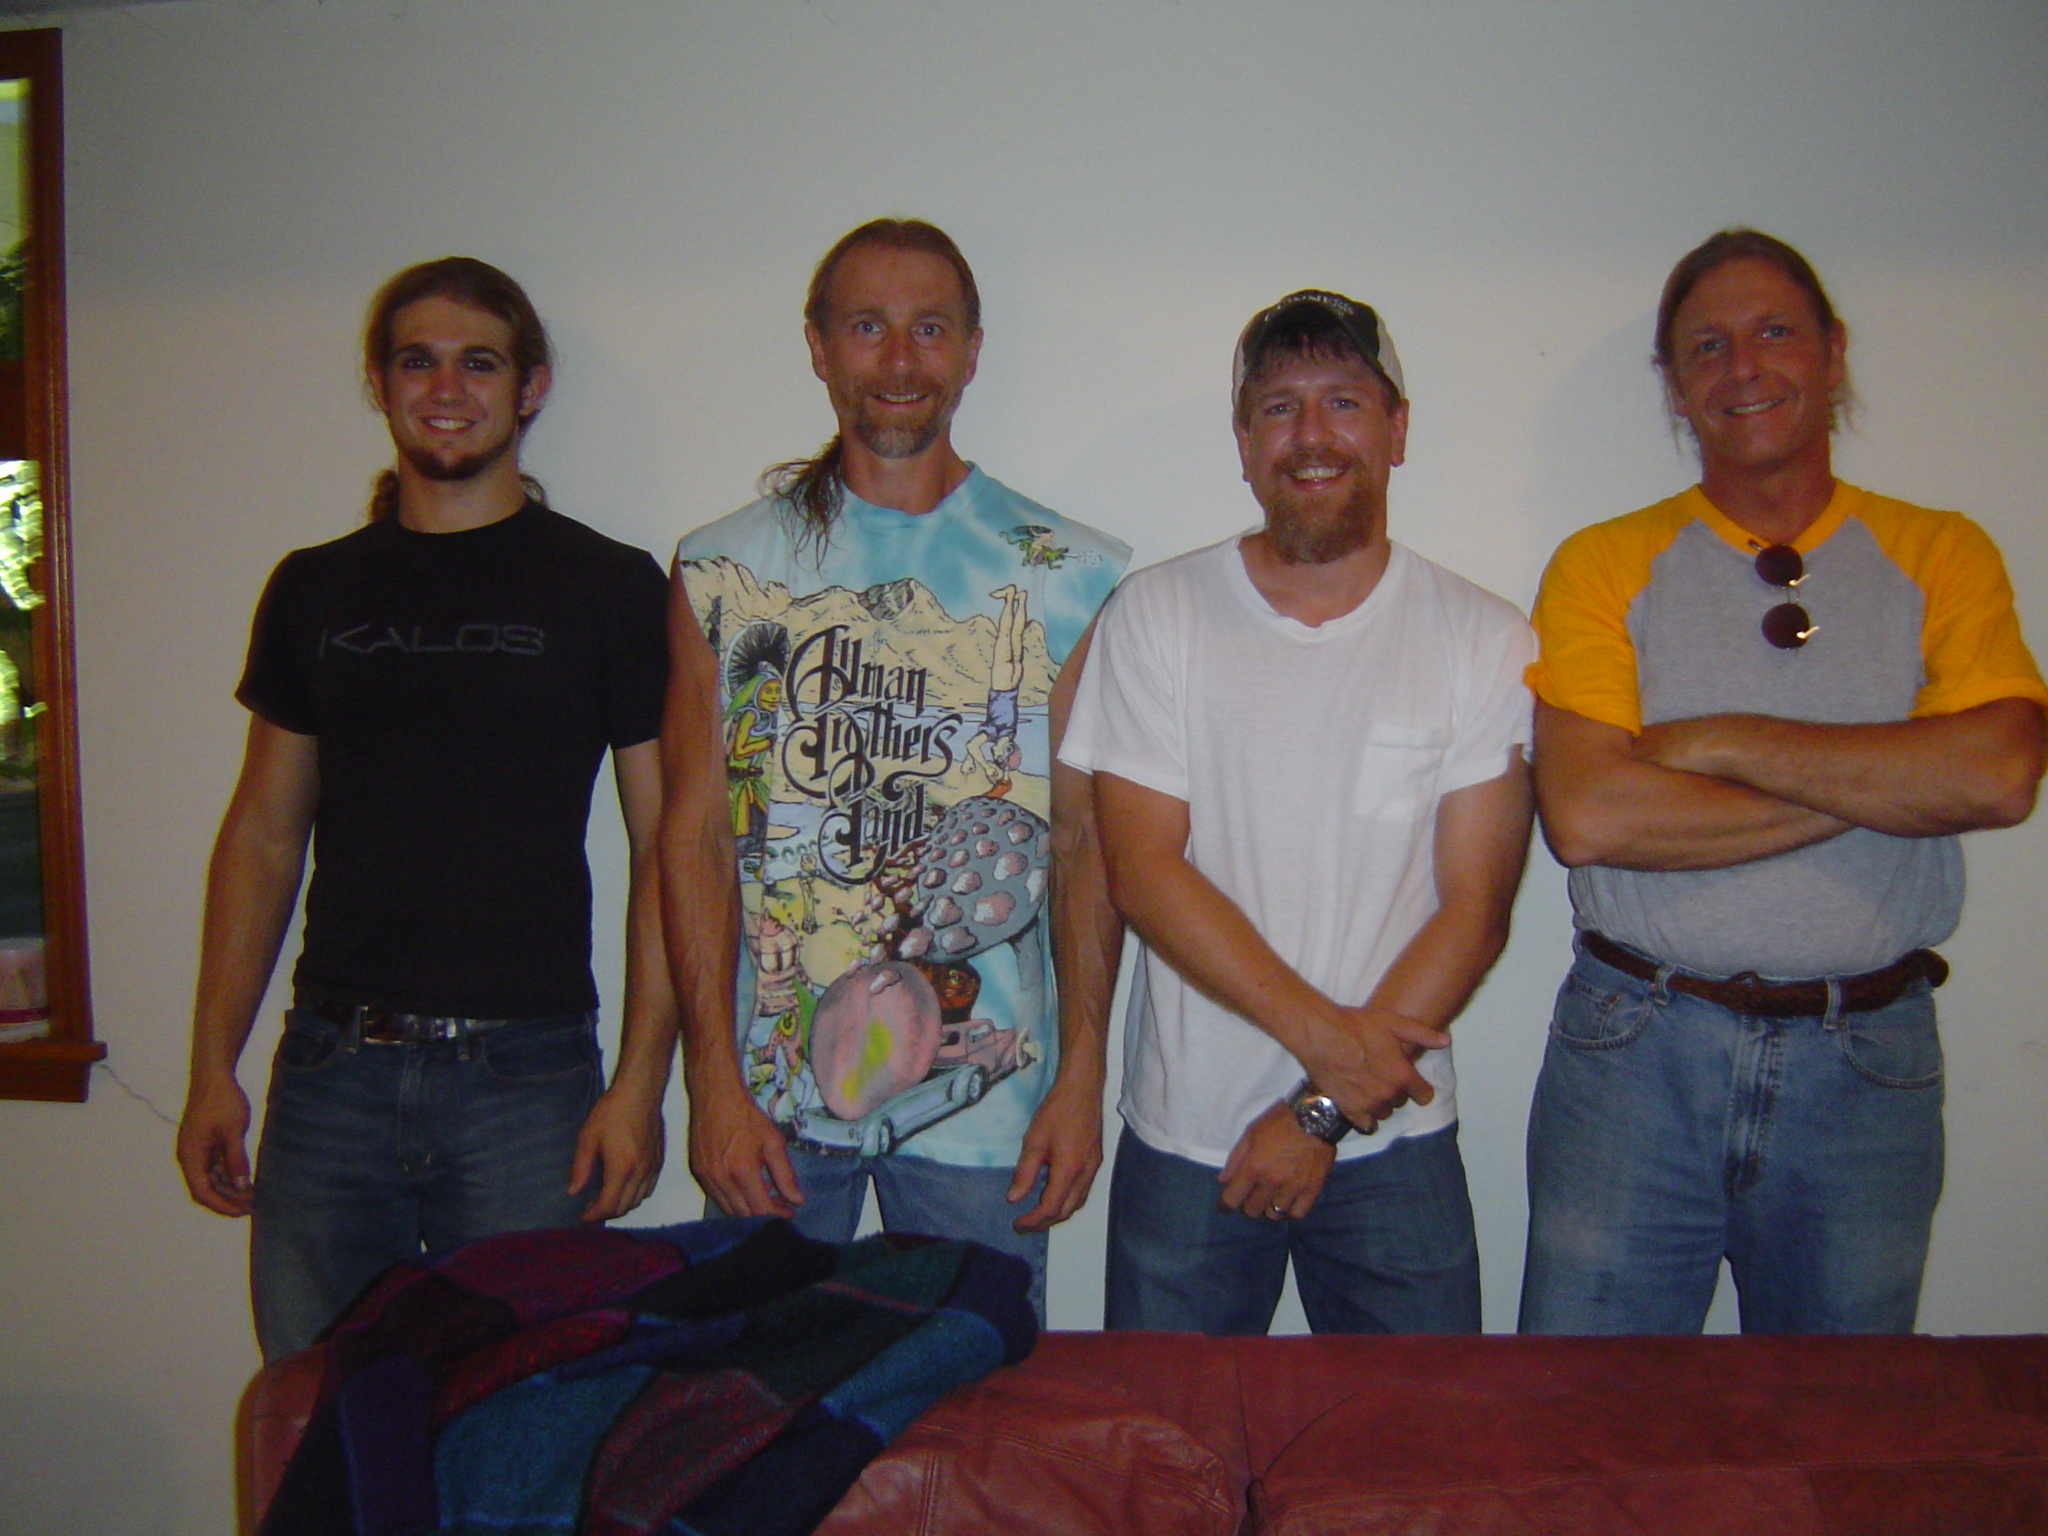 Caleb, Ron, Erik and Jon. This photo was taken before Caleb's 1st ever ABB show on September 20th, 2005 at the great Uptown Theater in Kansas City,Mo. Photo snapped by a Wrecker.